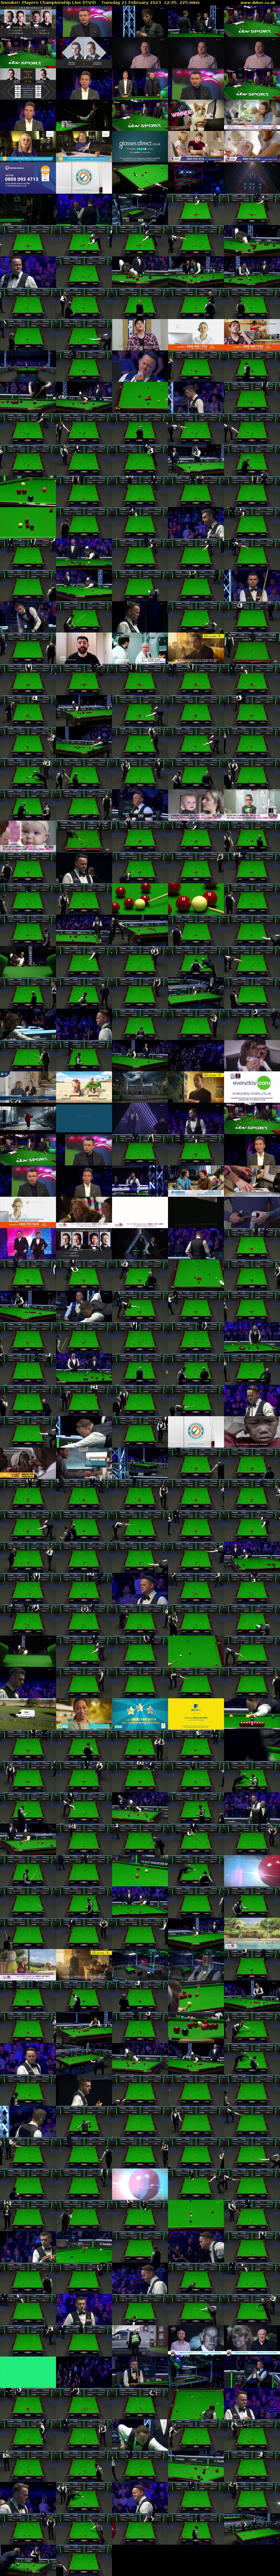 Snooker: Players Championship Live (ITV4) Tuesday 21 February 2023 12:45 - 16:30